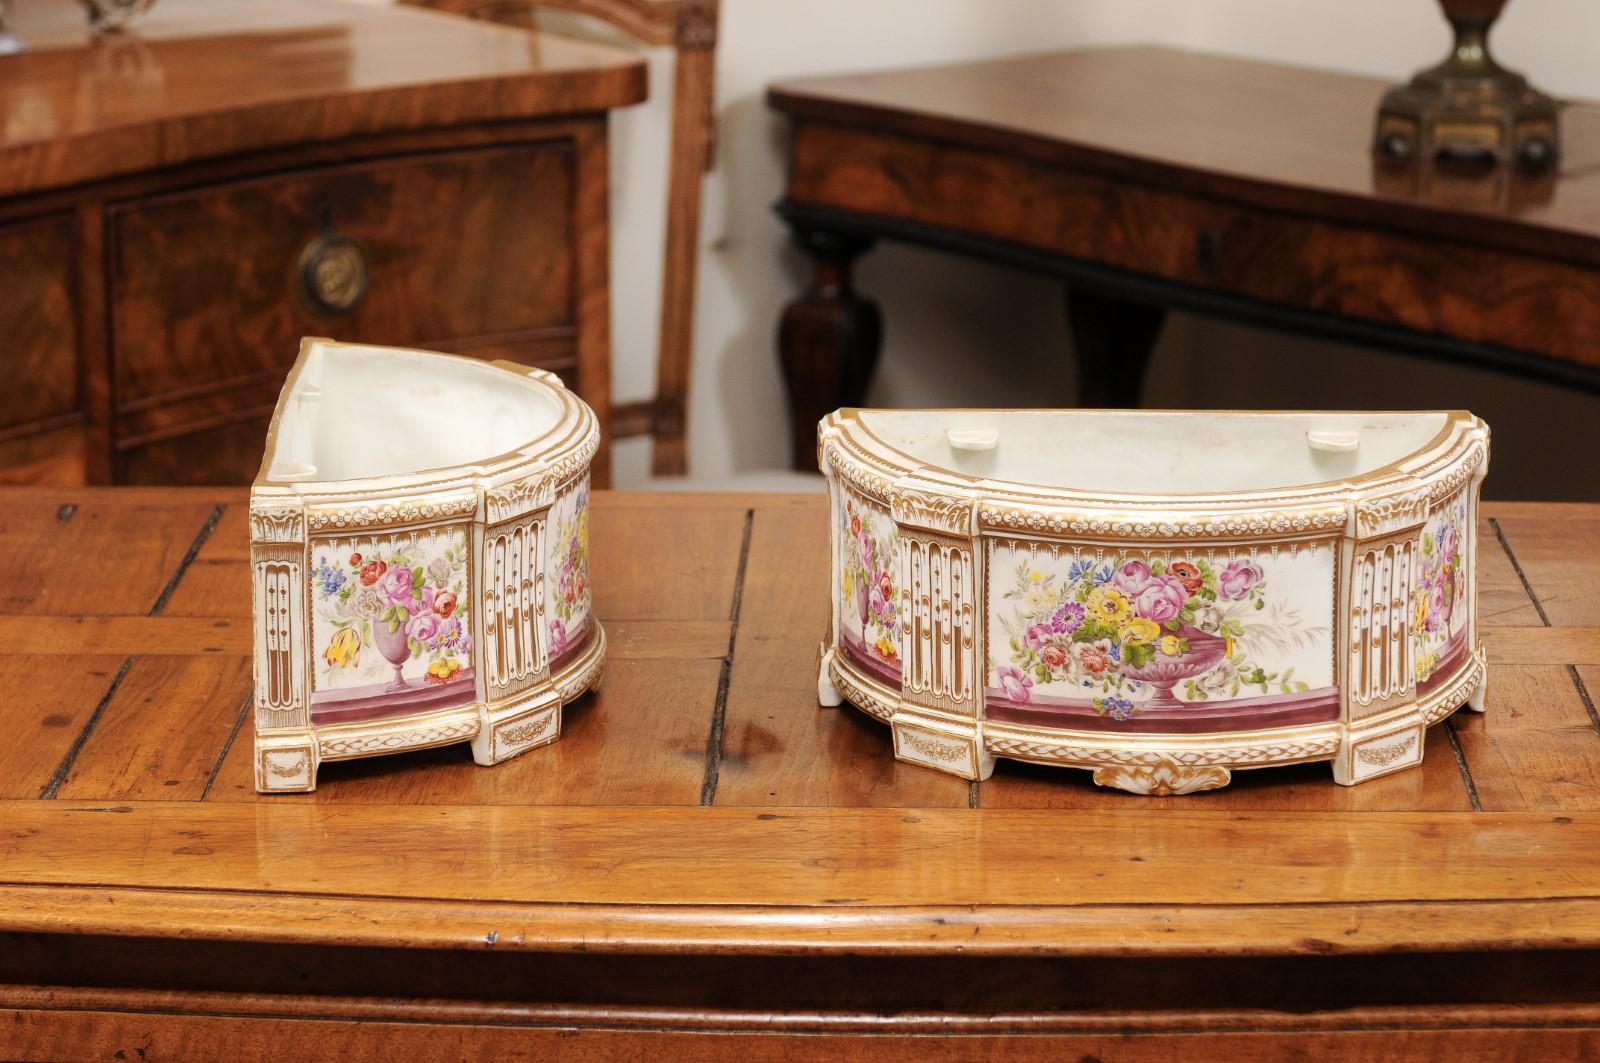 Pair of 19th Century French Porcelain Bough Pots with Gilt & Floral Accents For Sale 7